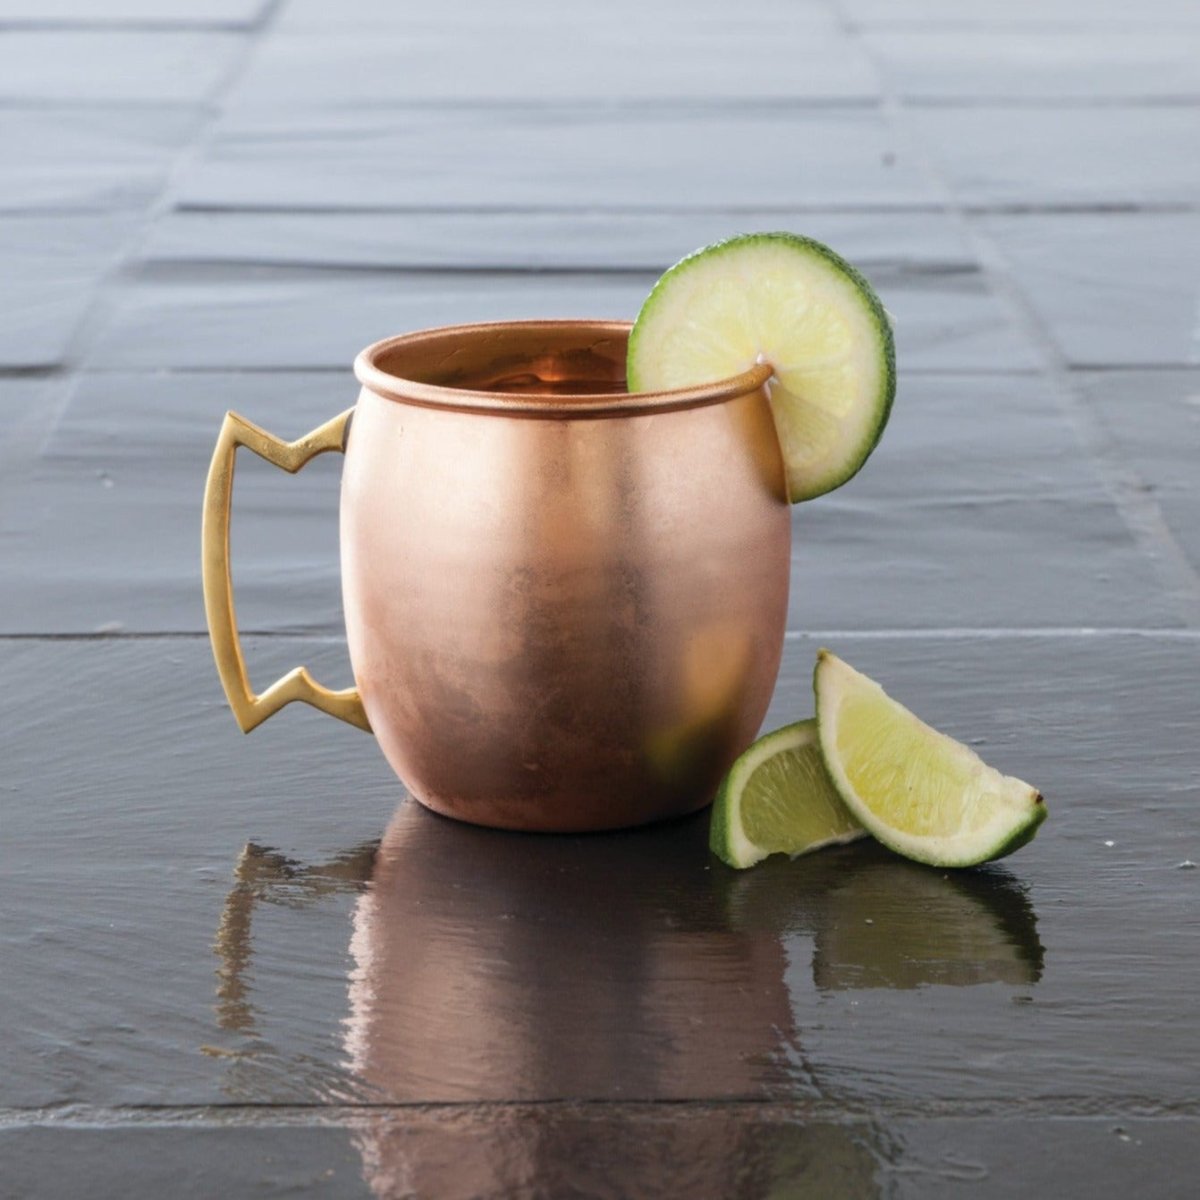 Twine Solid Copper Moscow Mule Mug with Brass Zig Zag Handle - lily & onyx